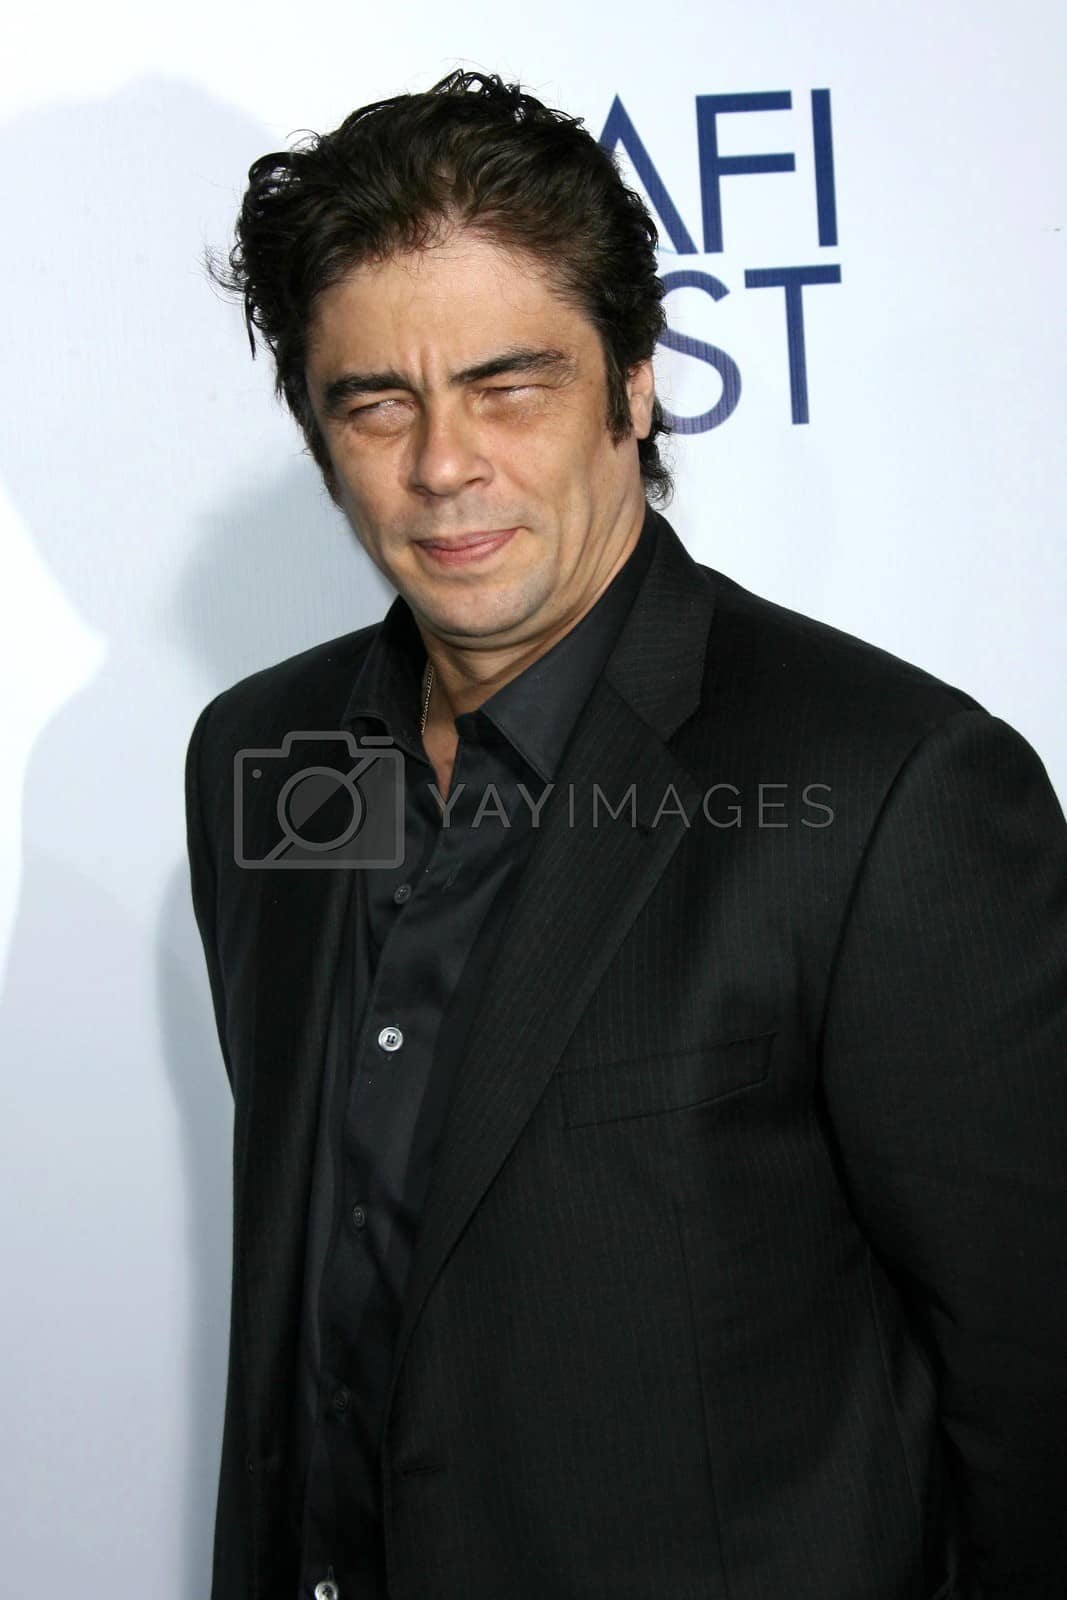 Royalty free image of Benicio Del Toro
/ImageCollect by ImageCollect